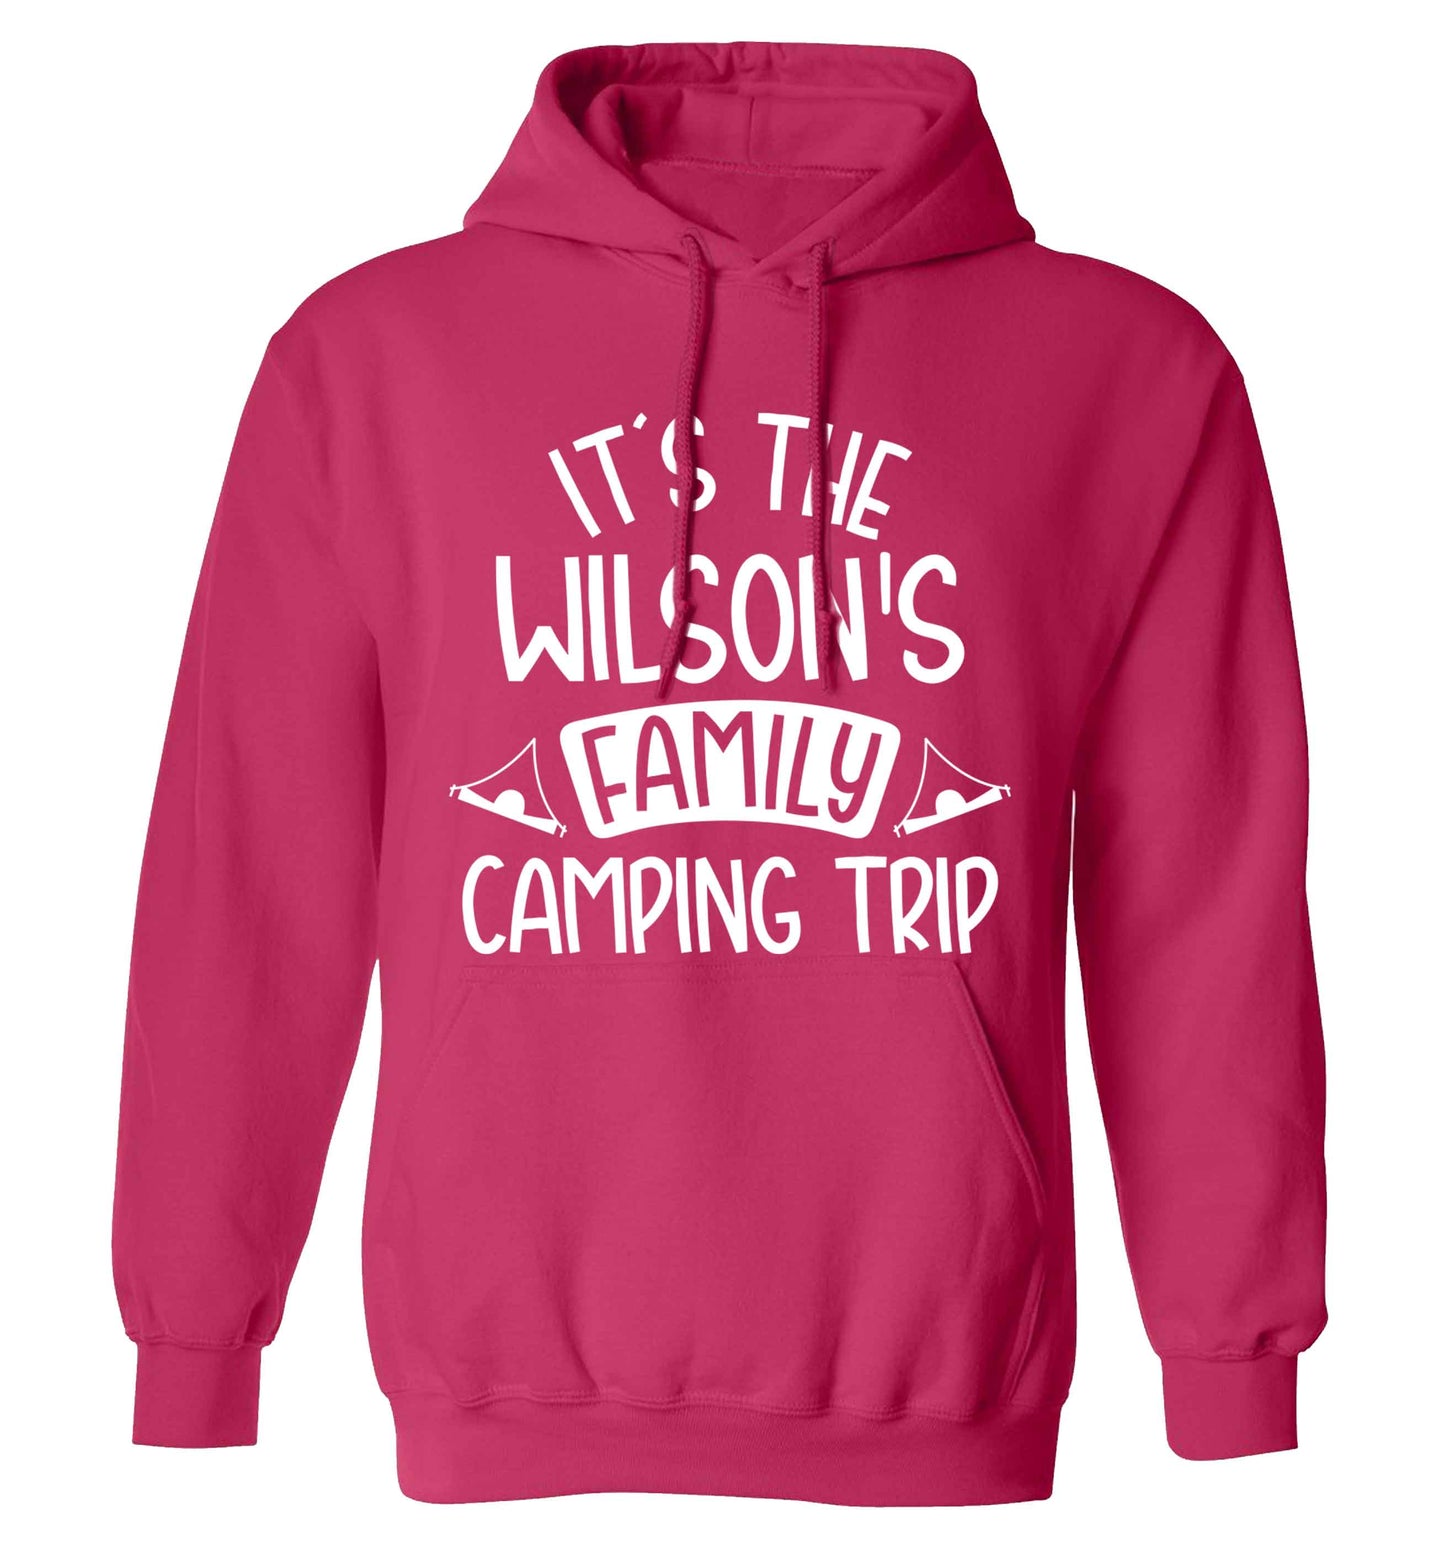 It's the Wilson's family camping trip personalised adults unisex pink hoodie 2XL